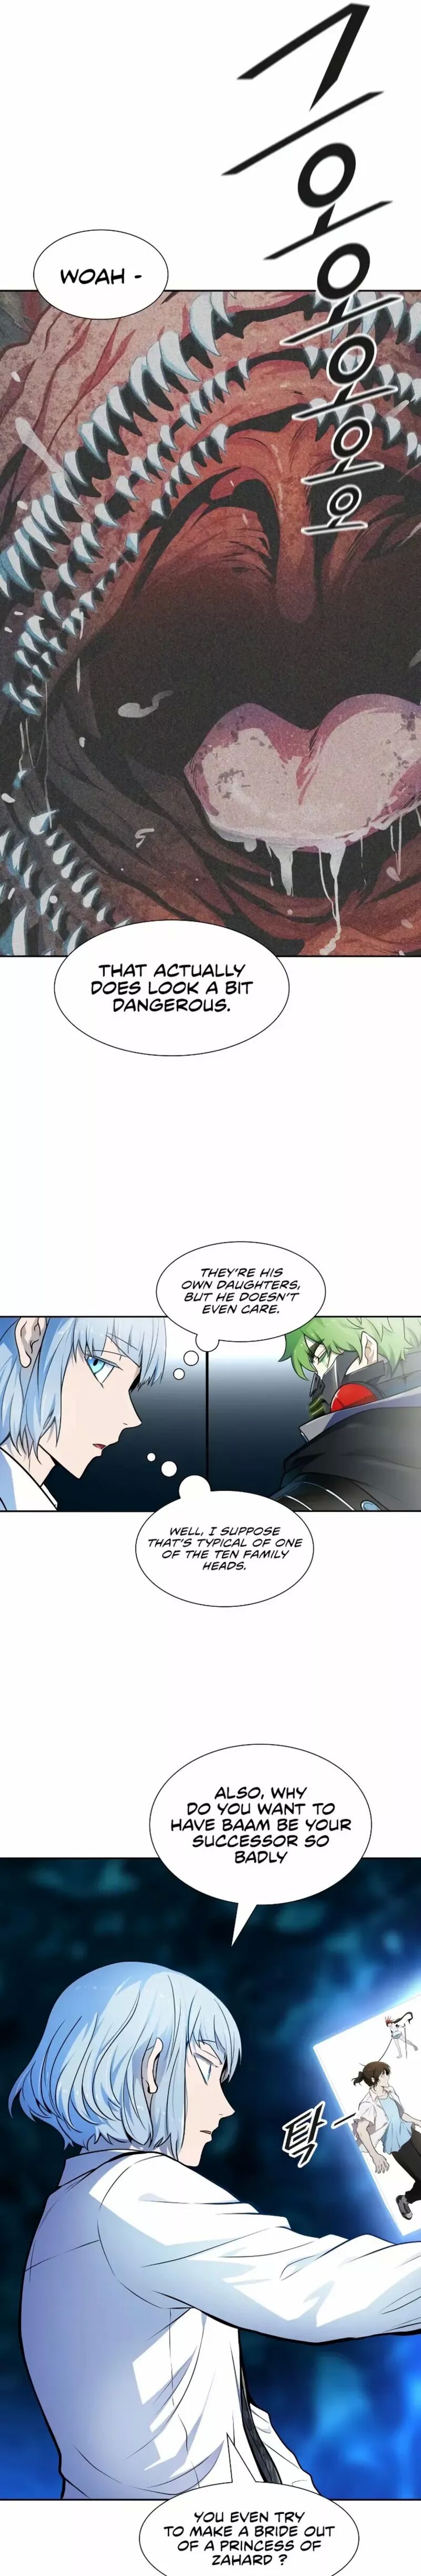 Tower Of God Chapter 572 Page 21